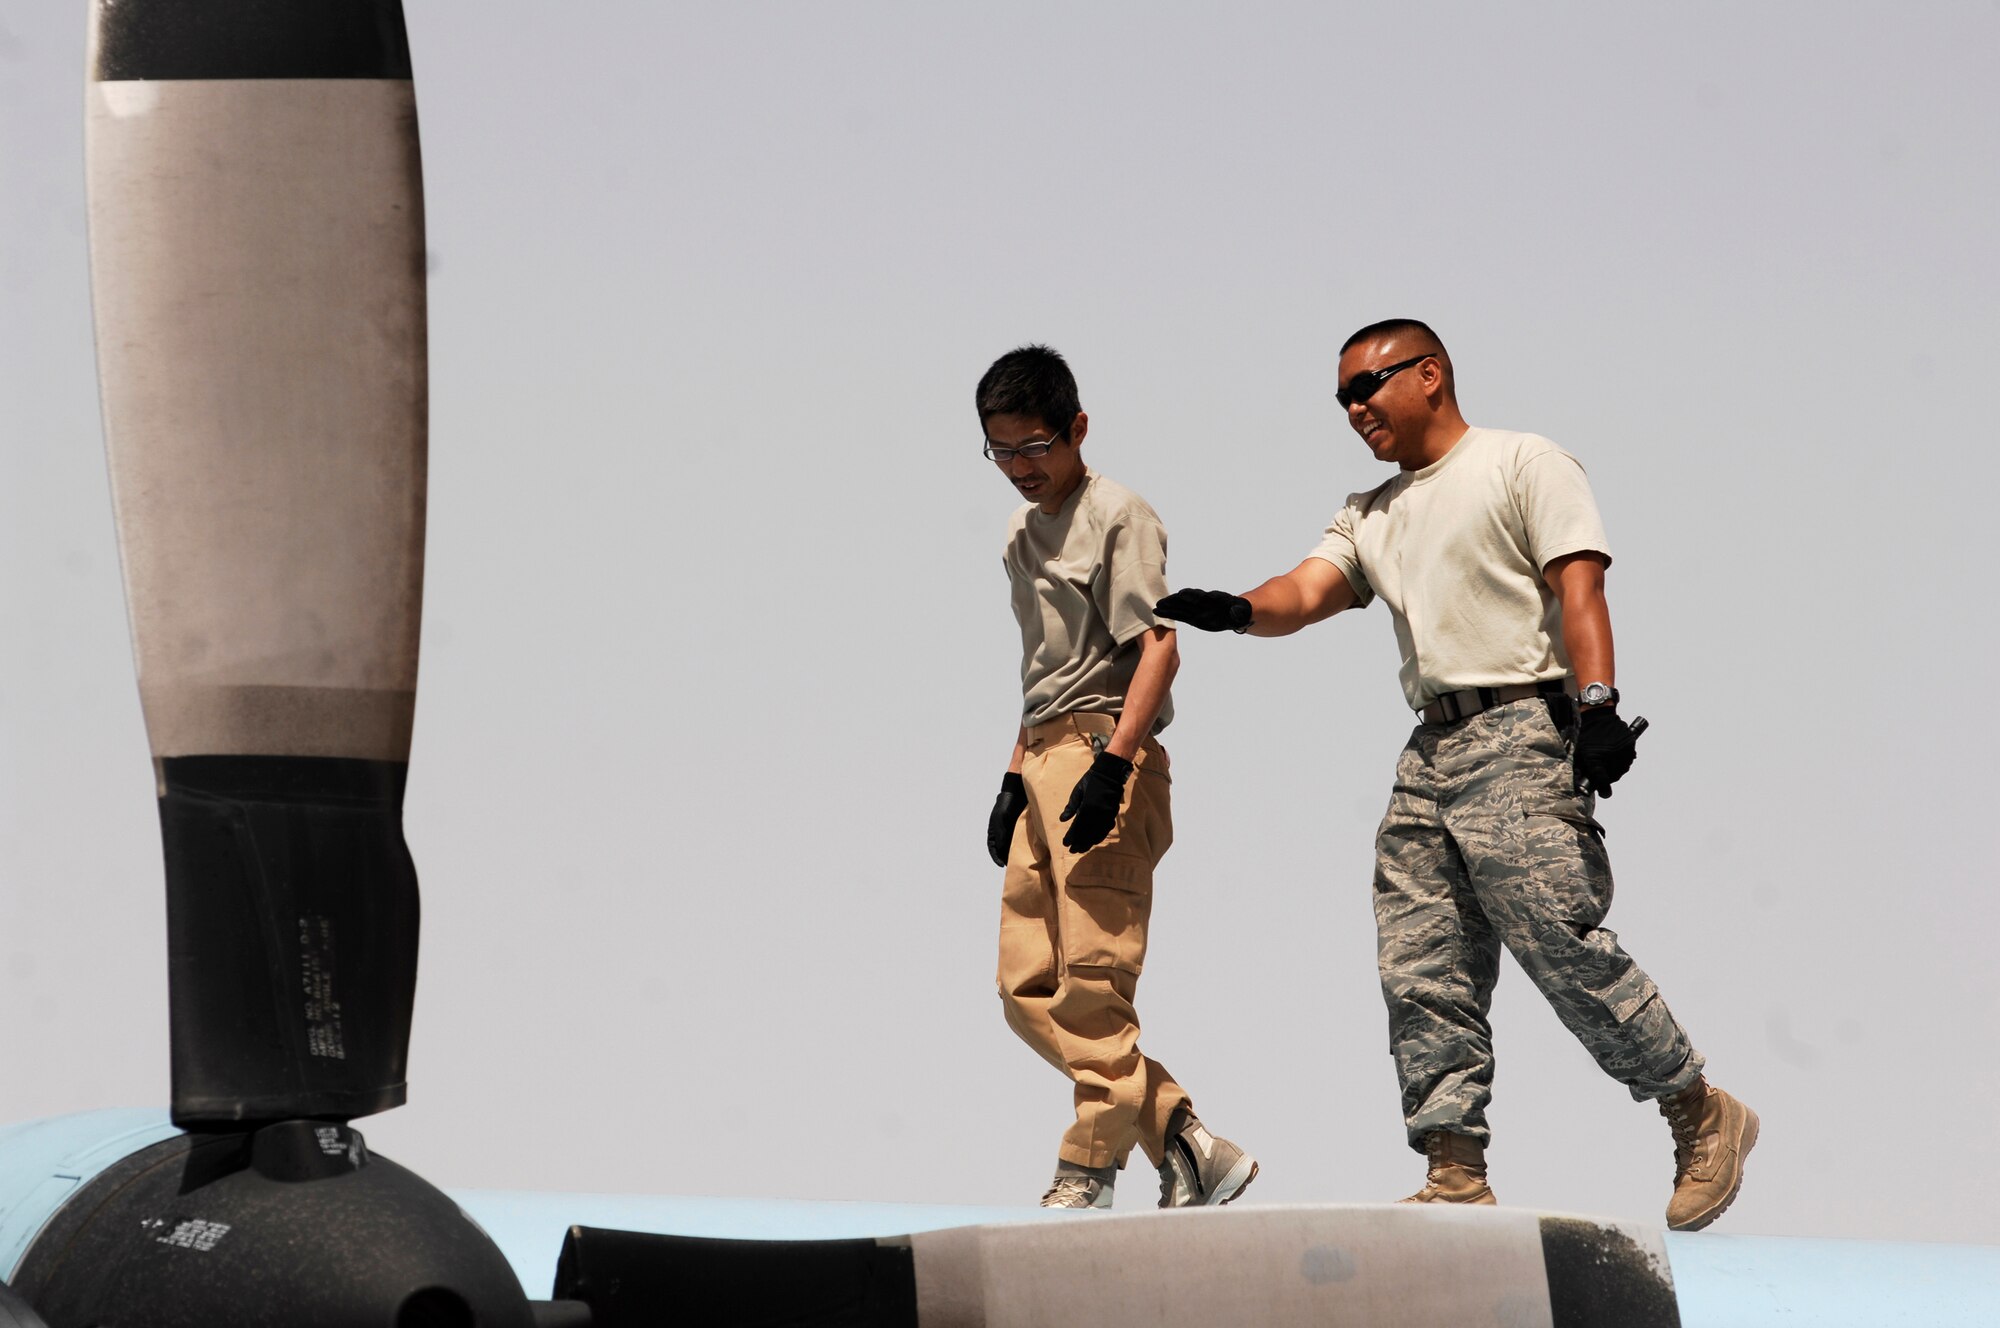 SOUTHWEST ASIA -- Technical Sergeant Hidetoshi Takeuchi (left), a maintainer from the Japan Air Self-Defense Force Iraq Reconstruction Support Airlift Wing and Staff Sgt. Ray Pontemayor (right), an aircraft maintainer deployed to the 386th Expeditionary Aircraft Maintenance Squadron, walk across the wings of JASDF C-130 Hercules March 21, 2008, at an air base in the Persian Gulf Region. Airmen from the U.S., JASDF, and Republic of Korea Air Force 58th Airlift Wing participated in a coalition maintenance exchange program allowing maintainers to sharpen their skills, exchange ideas, and promote closer relations among coalition air forces supporting the Global War on Terrorism. (U.S. Air Force photo/ Staff Sgt. Patrick Dixon)